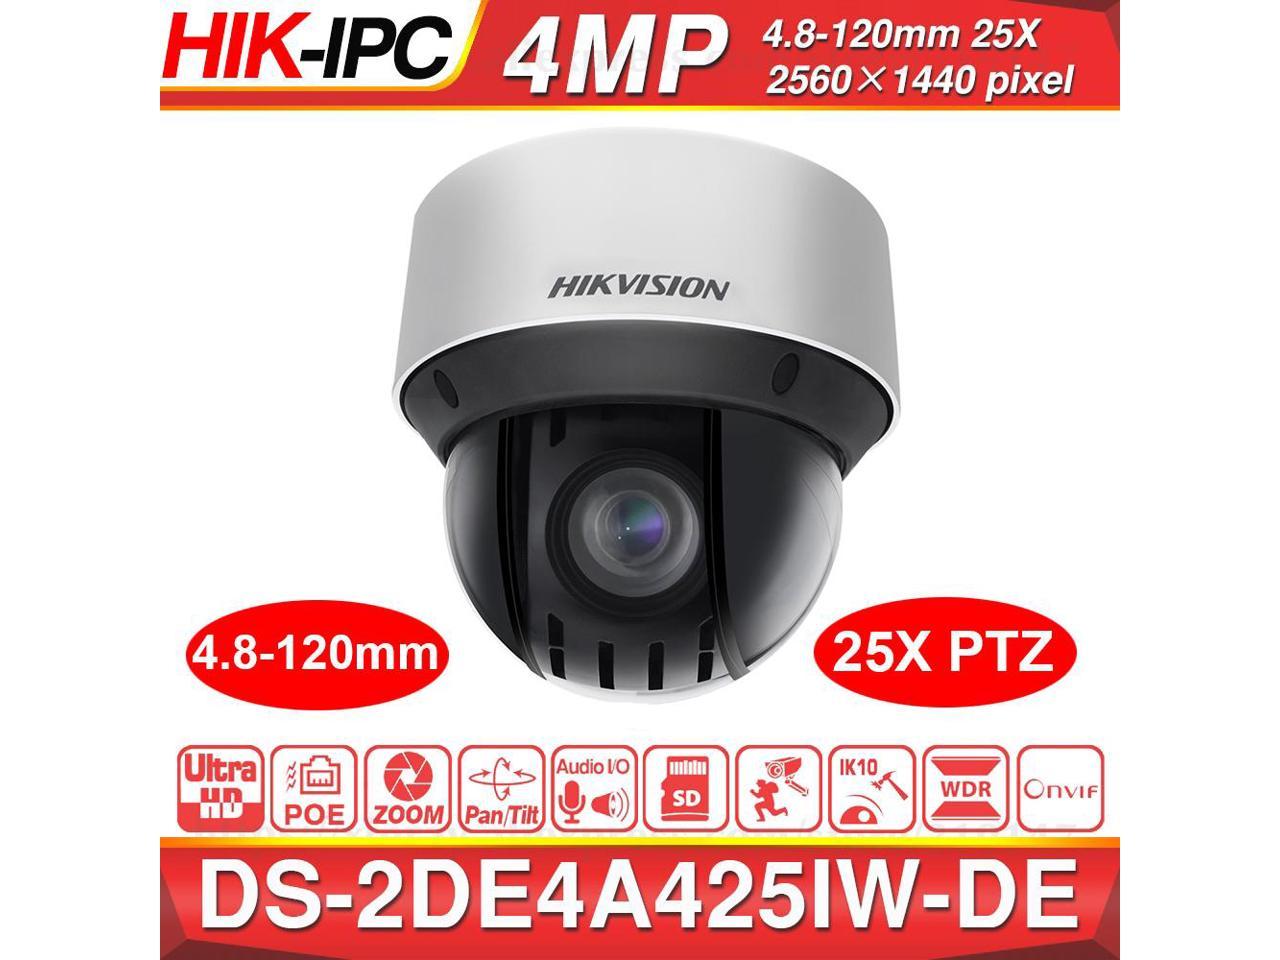 pivot formal rush Hikvision Powered by DarkFighter PTZ 25X Zoom 4.8-120mm Lens 4MP IP Camera  DS-2DE4A425IW-DE H265+ POE CCTV Outdoor Video Network PTZ Speed Dome Camera  - Newegg.com